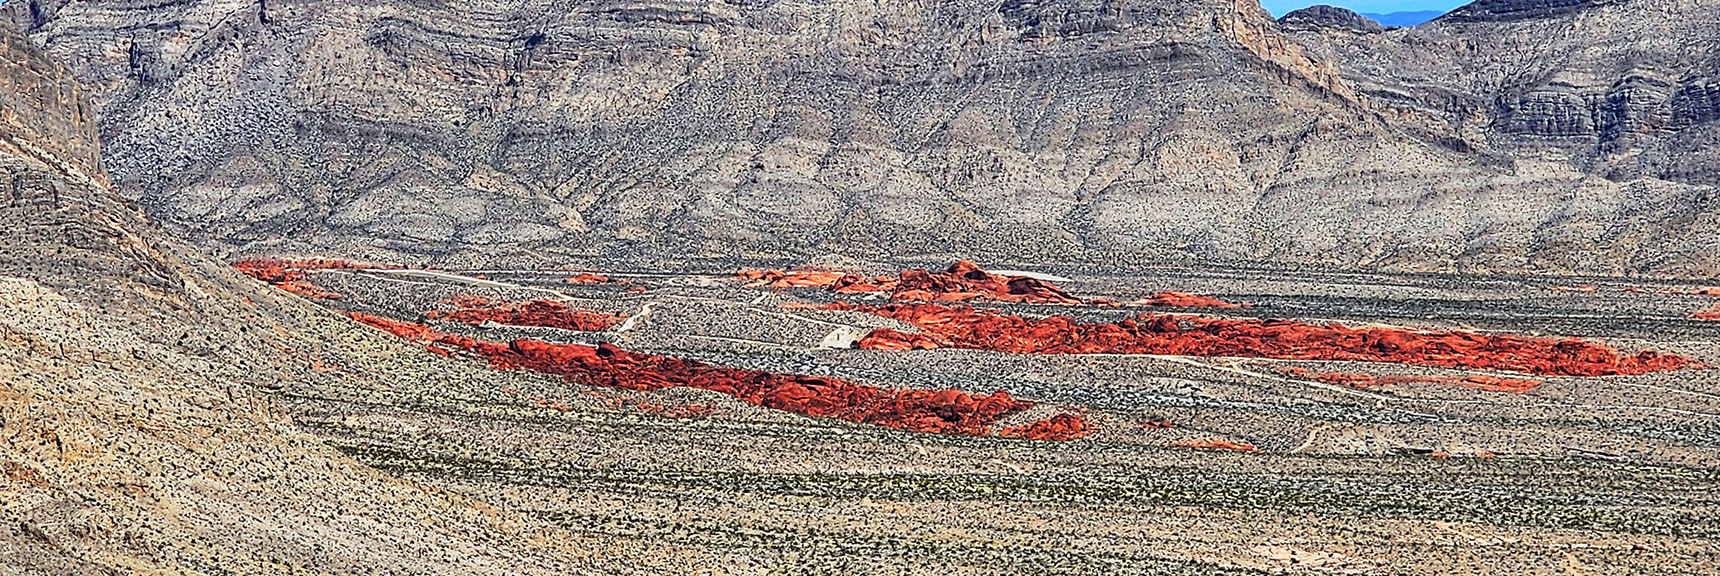 Enlarged View of Little Red Rock, Owned by Howard Hughes Corporation. | Gray Cap Ridge / Brownstone Basin Loop | La Madre Mountains Wilderness, Nevada